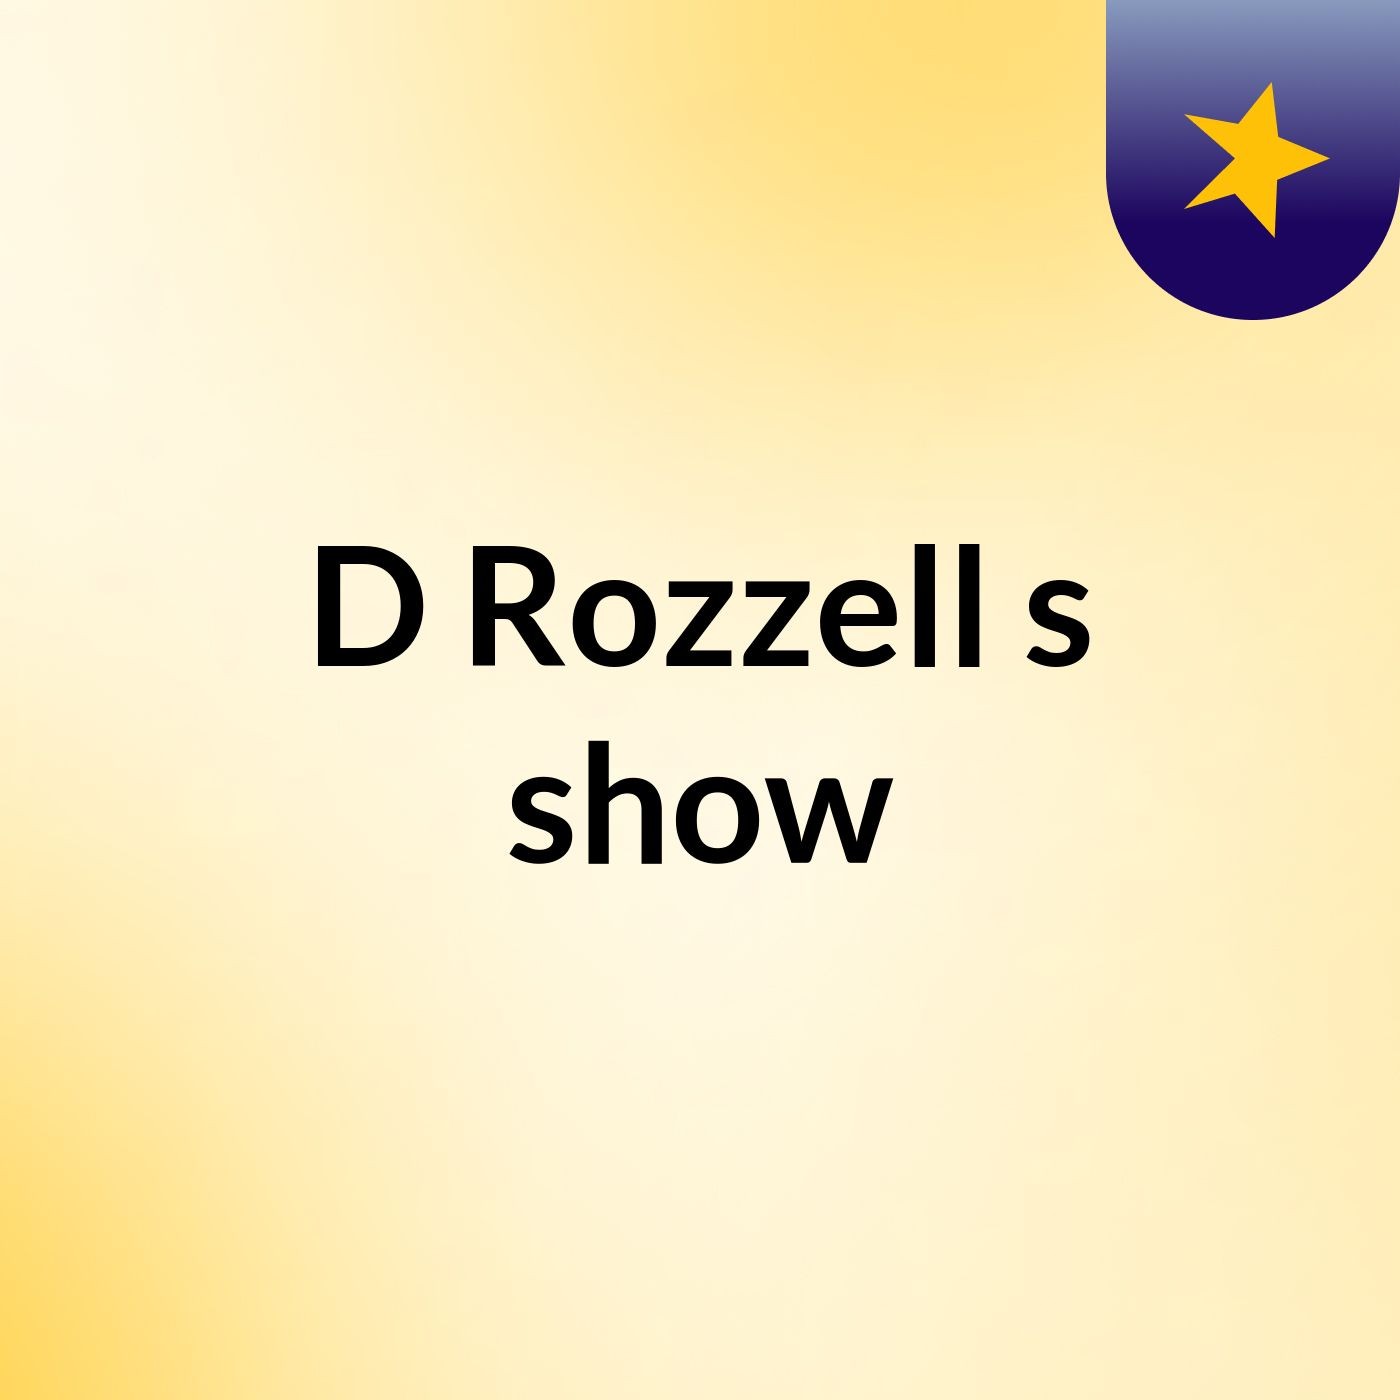 D Rozzell's show